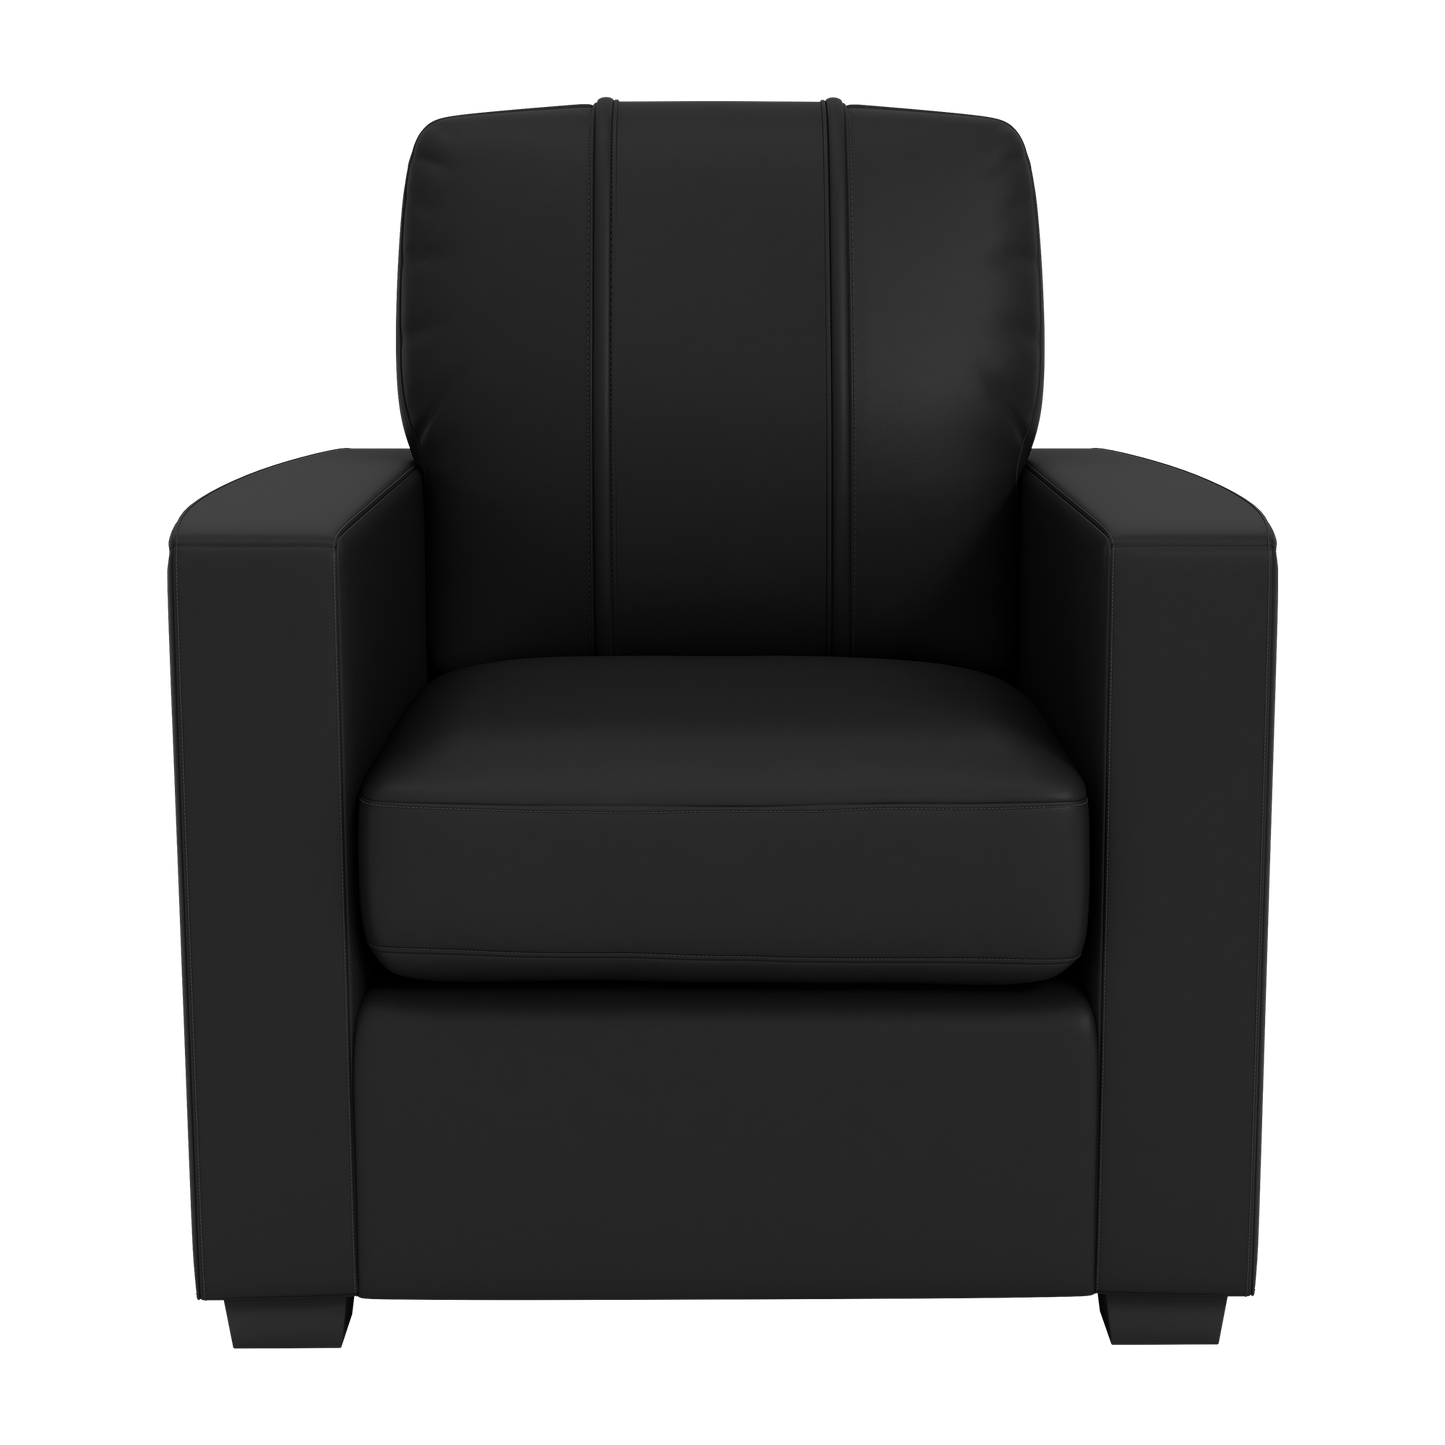 Silver Club Chair with North Carolina State Wolf Logo